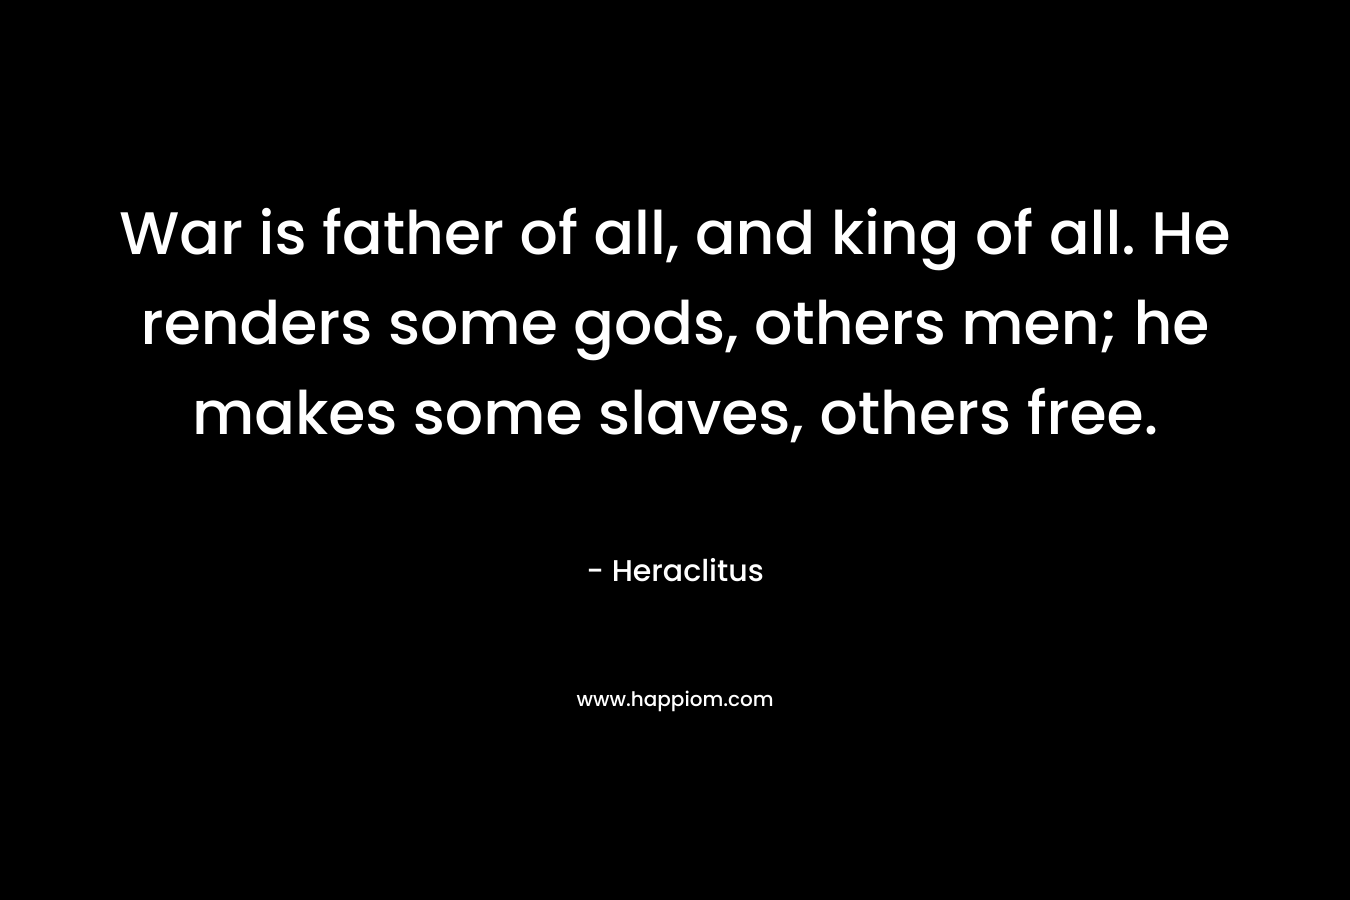 War is father of all, and king of all. He renders some gods, others men; he makes some slaves, others free. – Heraclitus